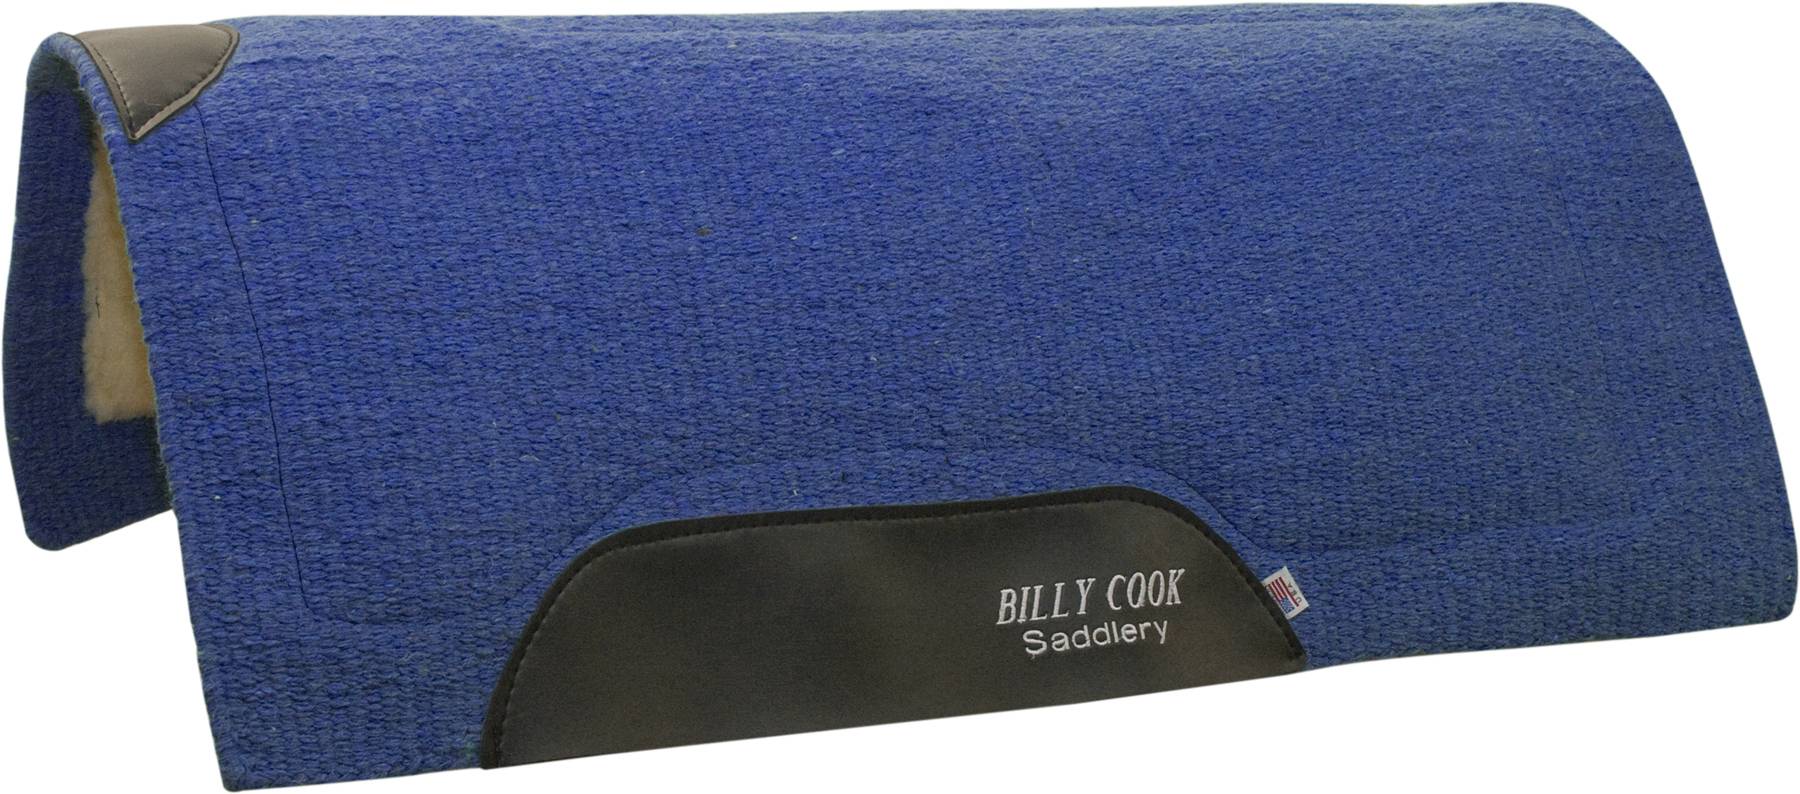 12296BCSBE Billy Cook Saddlery Solid Show Pad sku 12296BCSBE